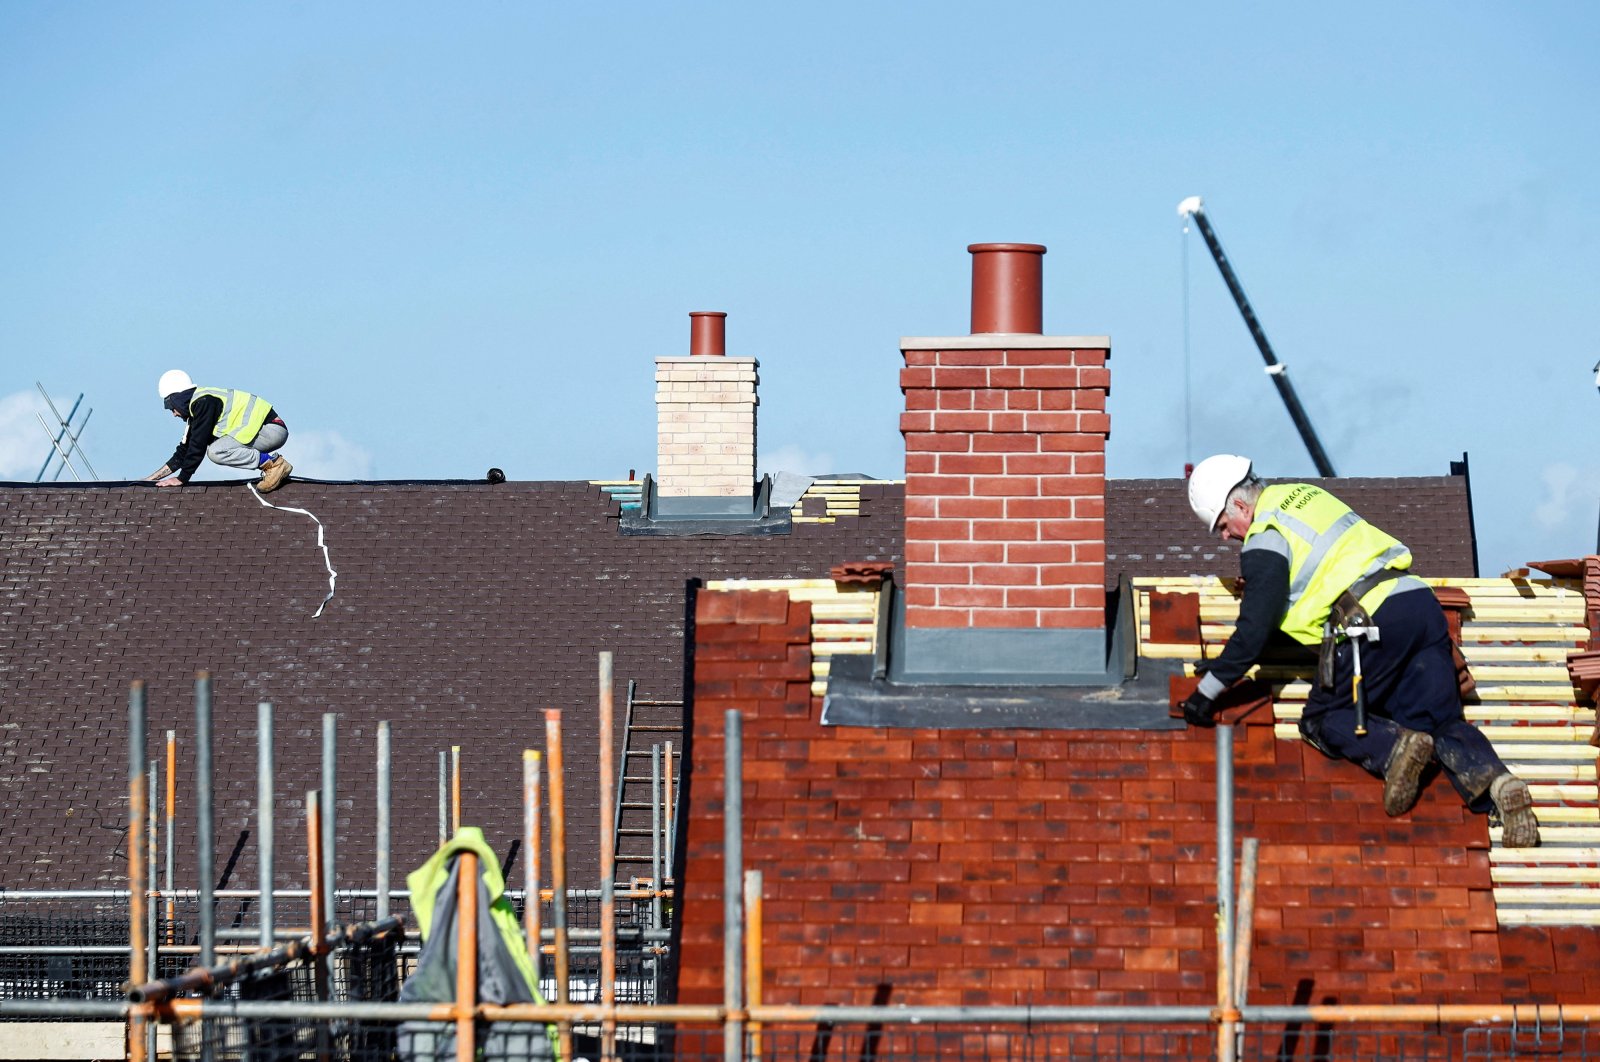 Construction workers work on a Taylor Wimpey housing estate in Aylesbury, U.K., Feb. 7, 2017. (Reuters Photo)